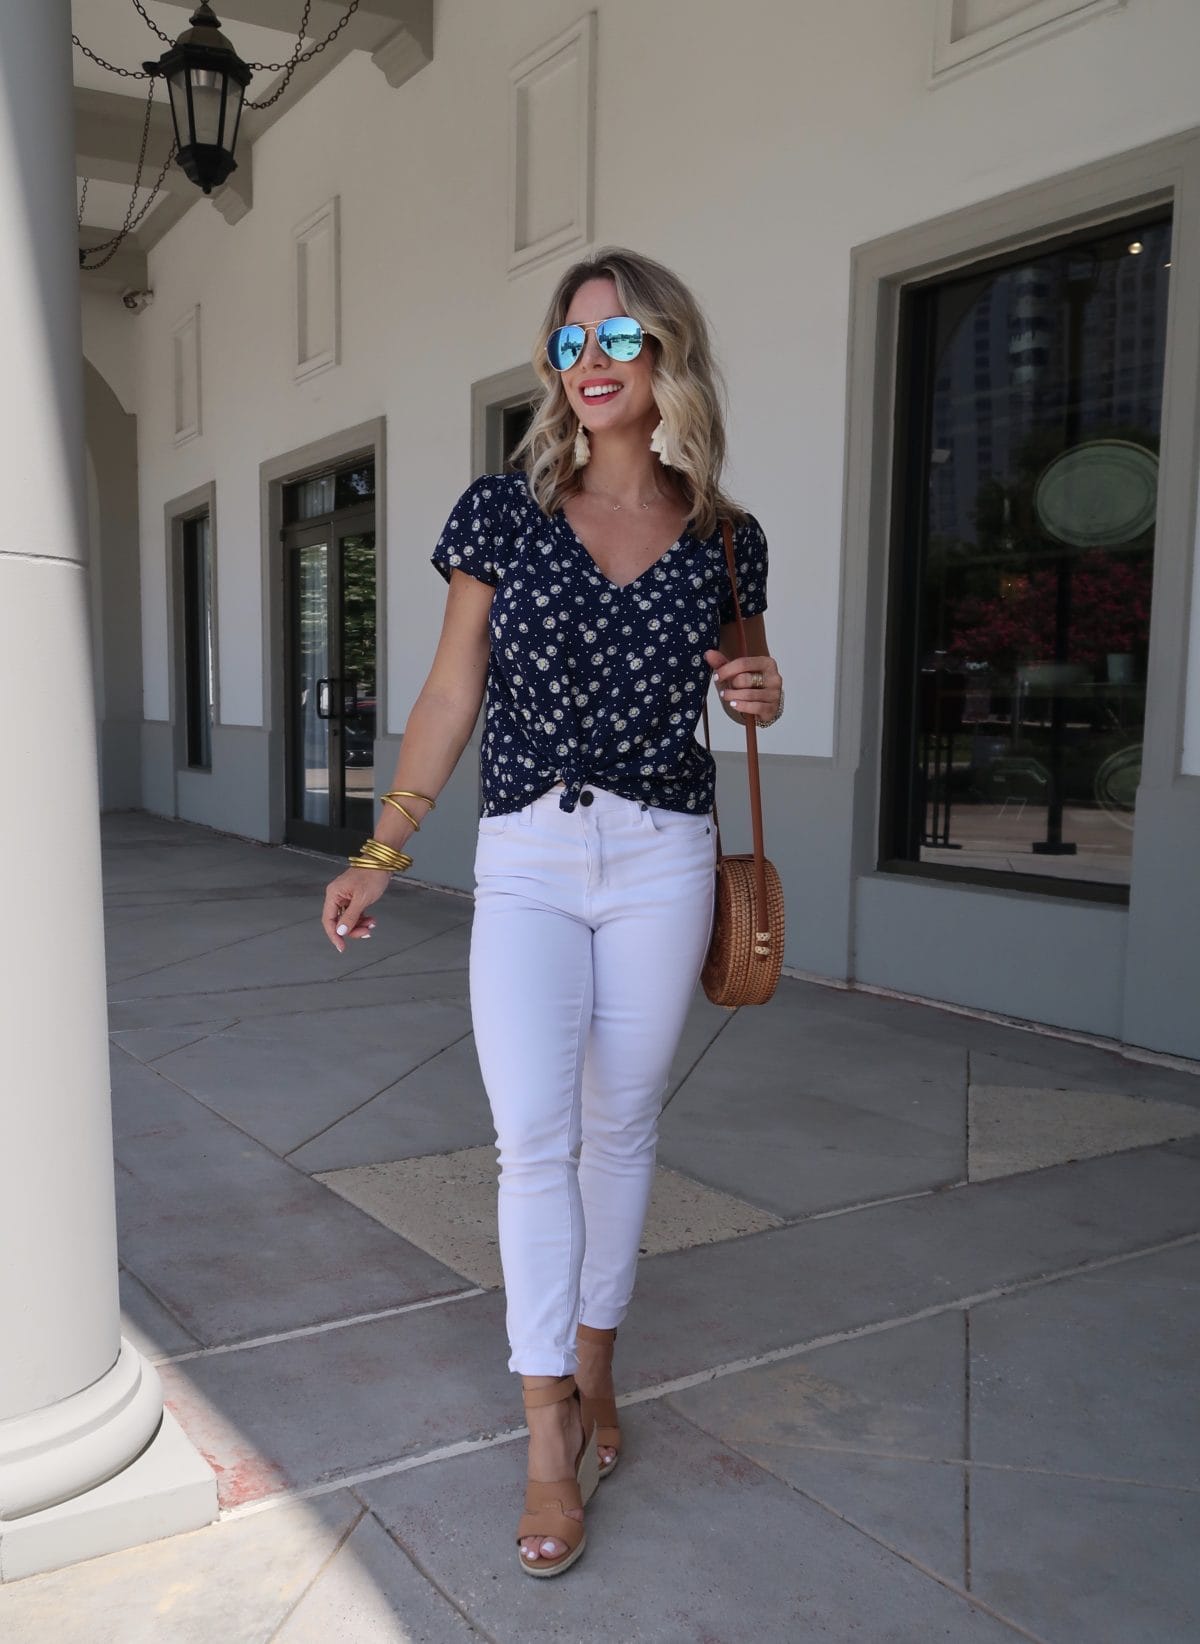 New Summer Styles, Nordstrom and Gibson, Daisy Print Top, Kut from Kloth Jeans, Wedges, Woven Bag, Blue Sunglasses